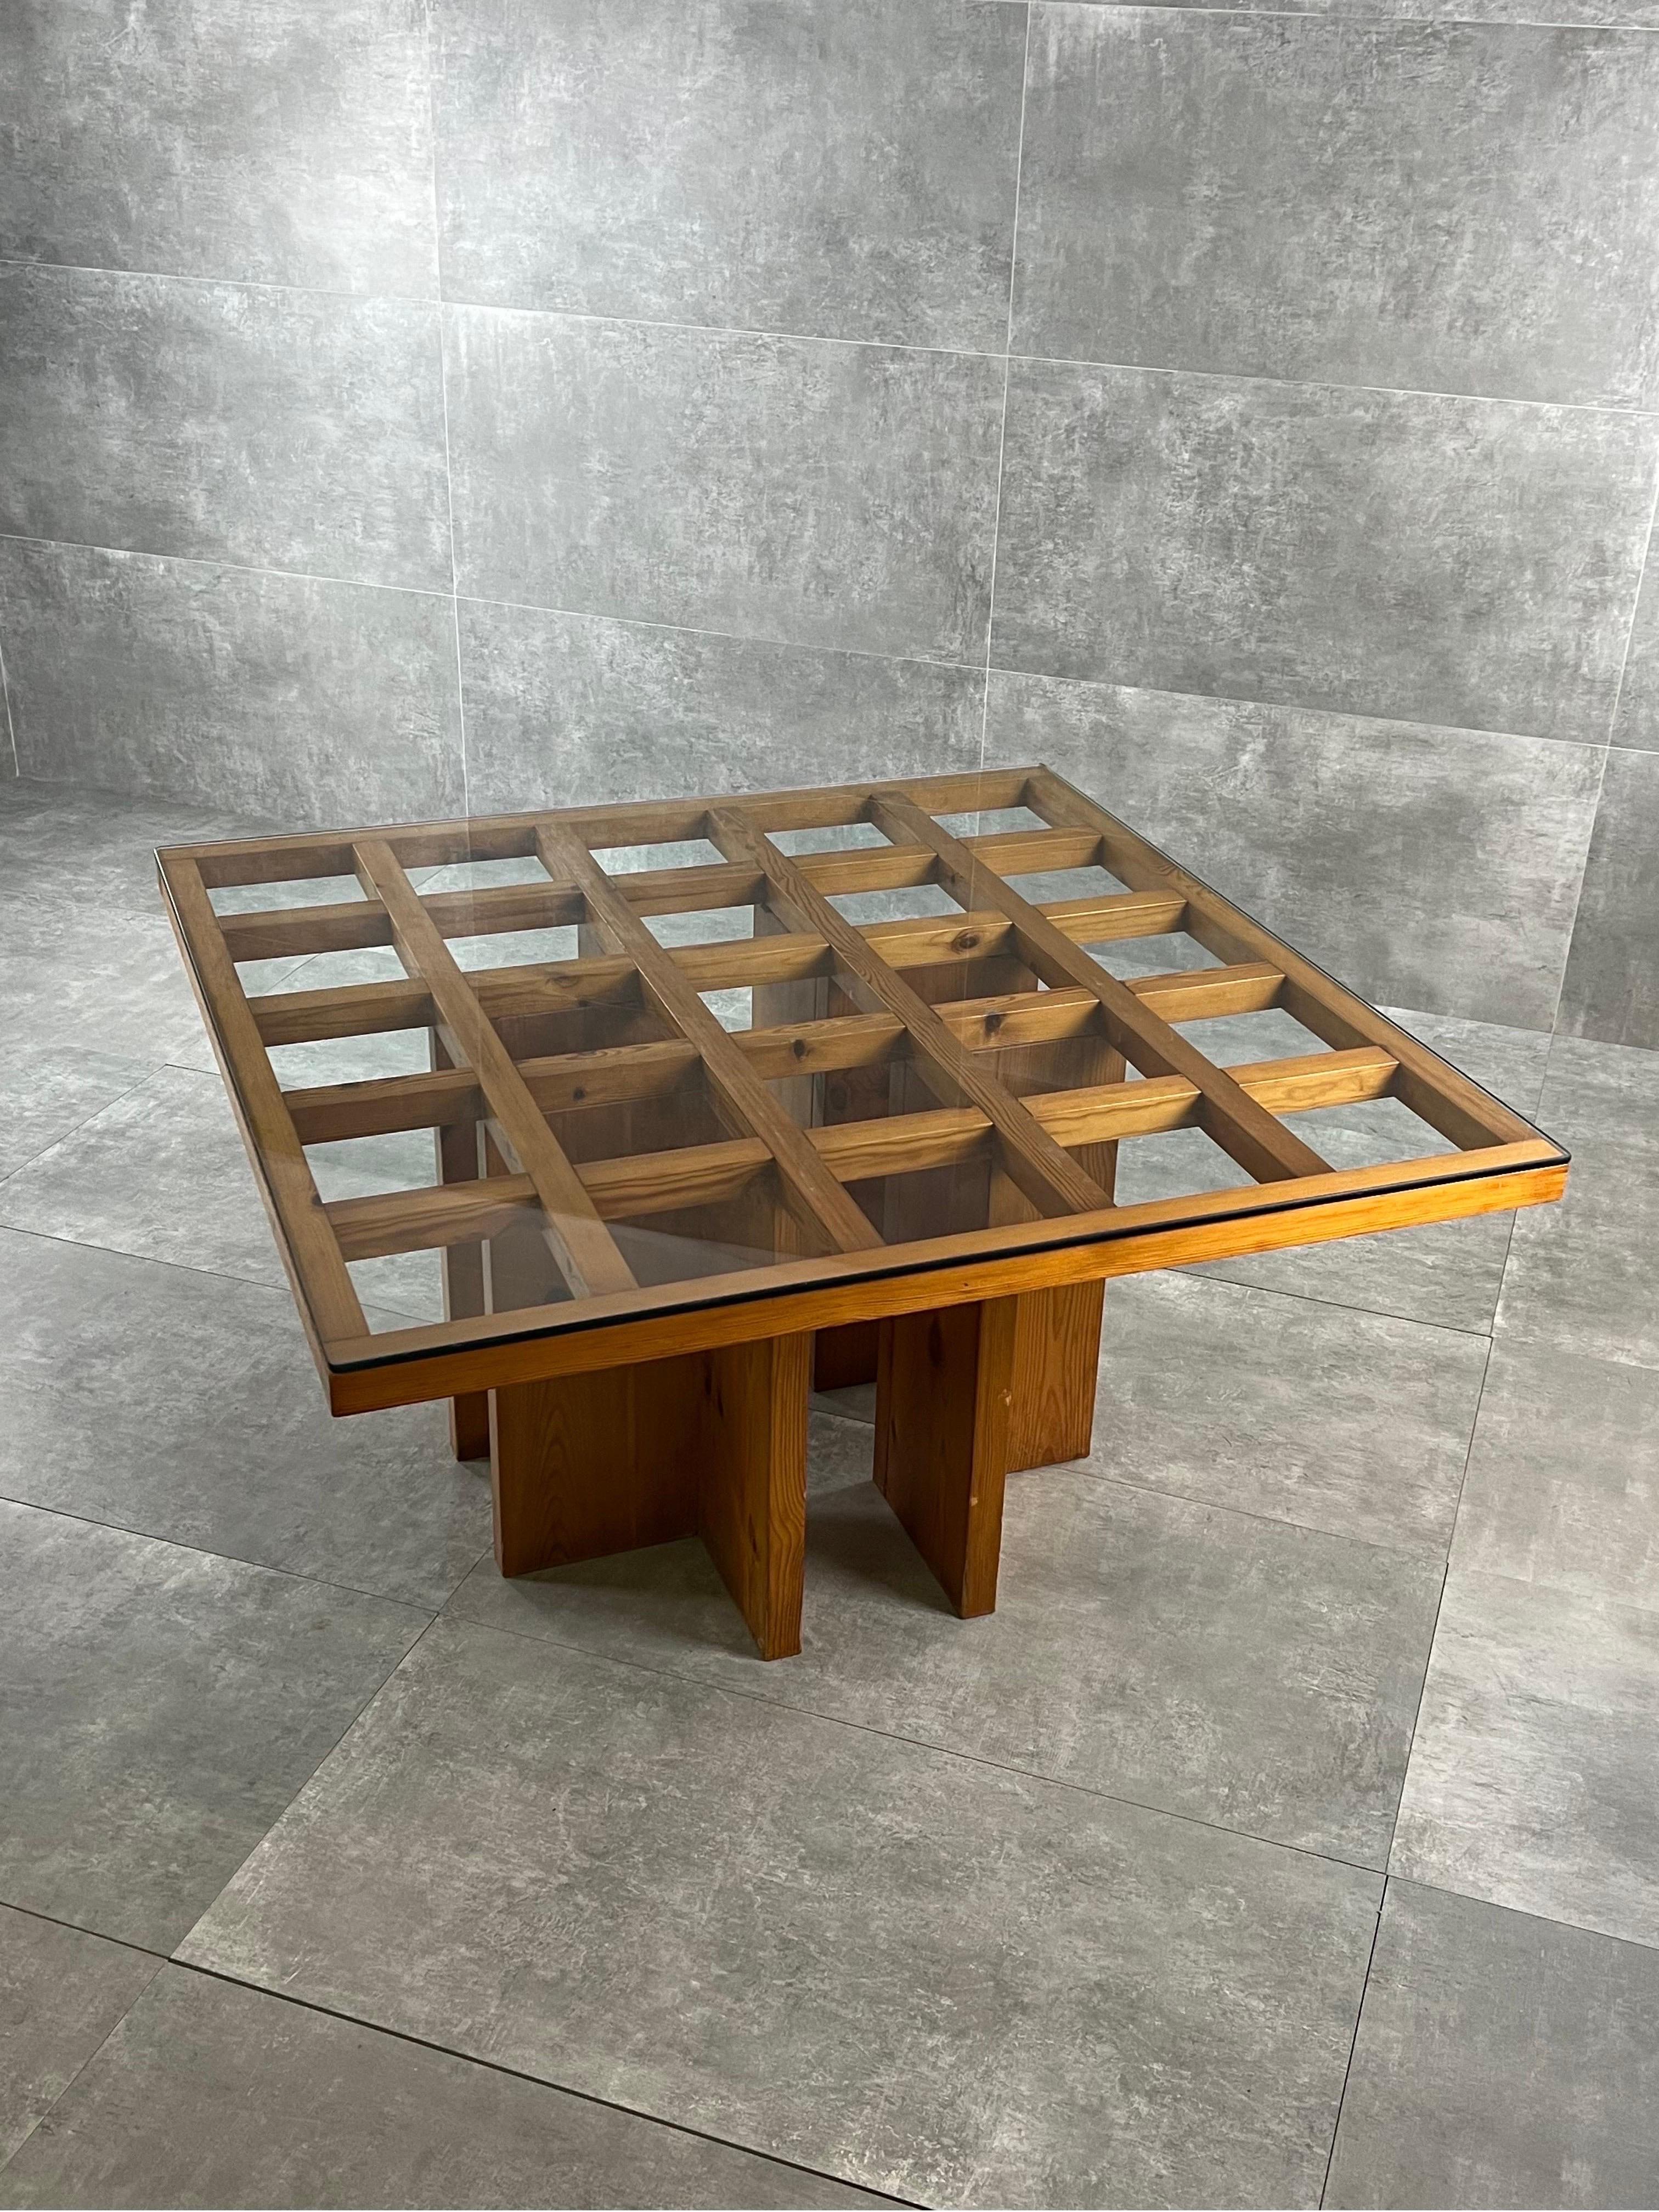 “Regolo” dining table,  designed by Gianfranco Fini in 1975 and manufactured by Poltronova. This table features a pine wood structure with a thick glass top.